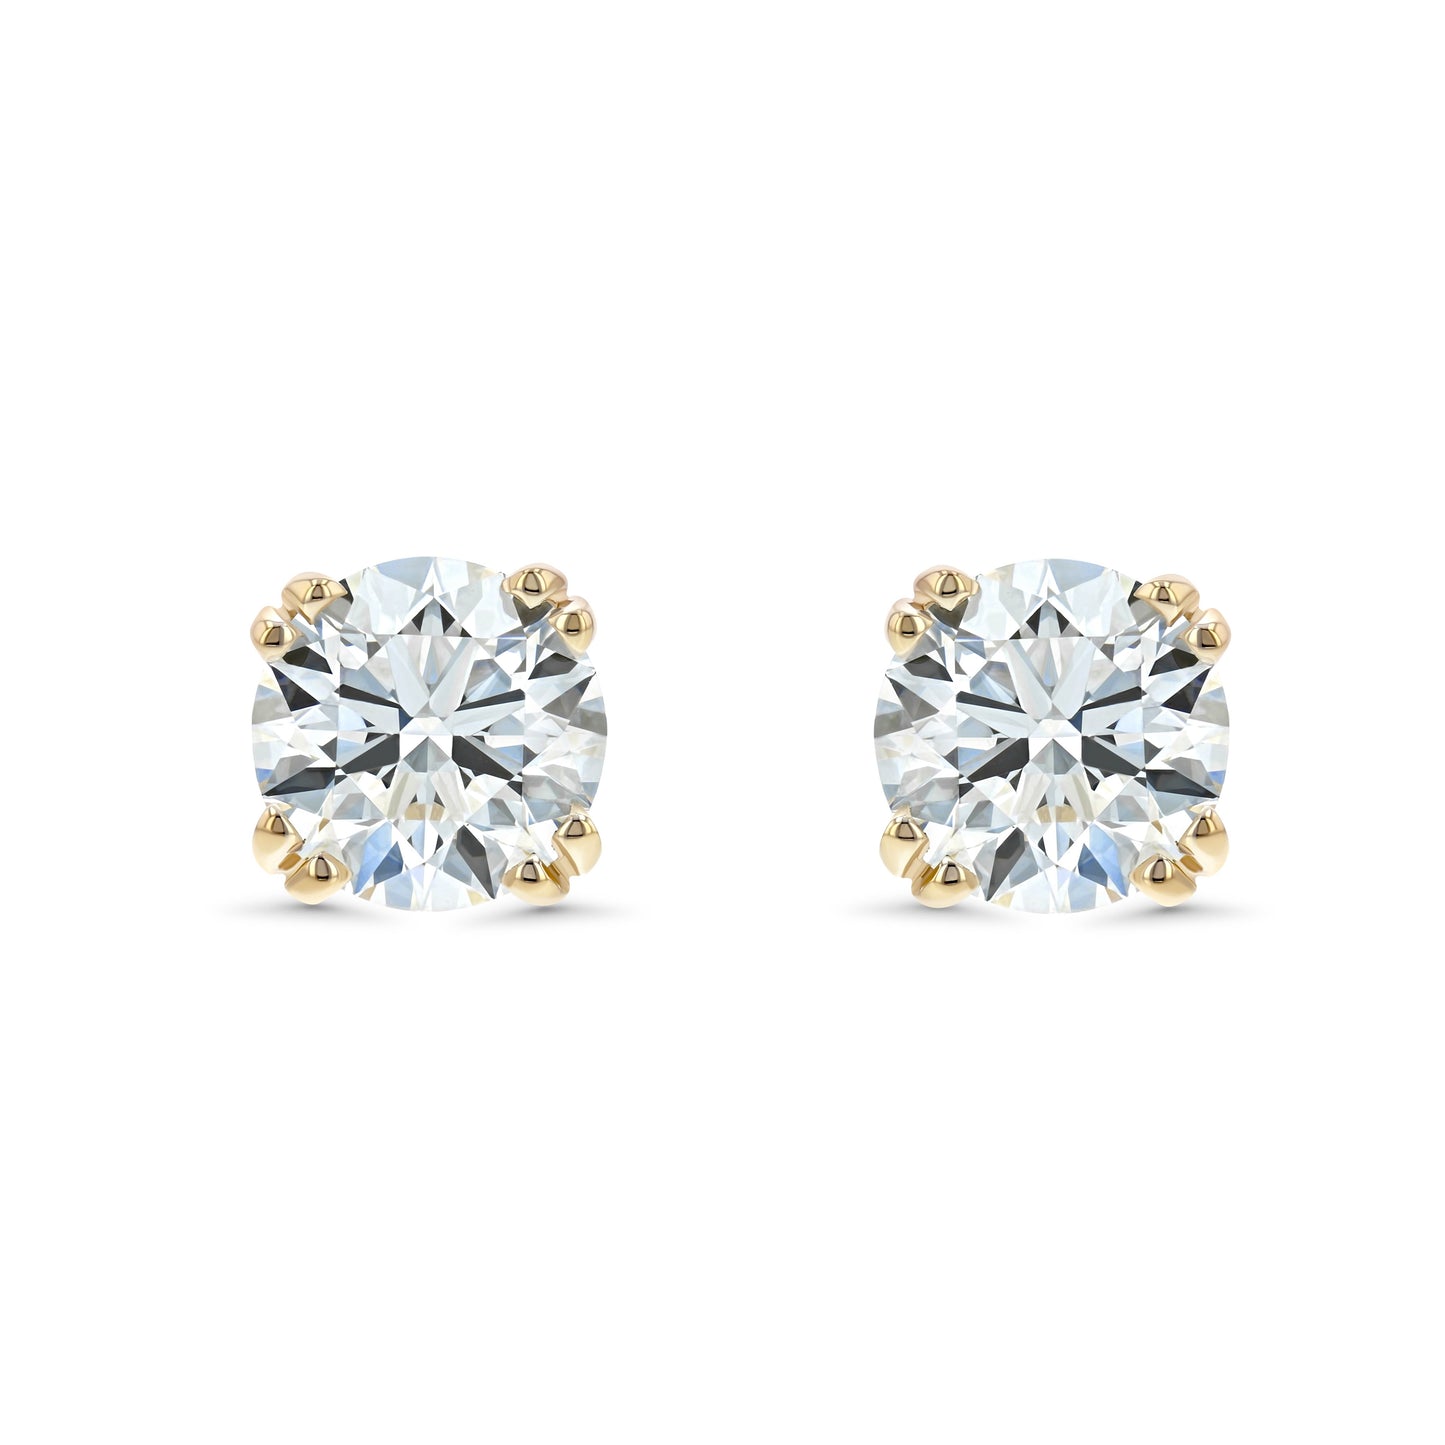 18k Yellow Gold Double Prong Round Diamond Stud Earrings 1ctw (5.2mm Ea), H Color, Si3-i1 Clarity